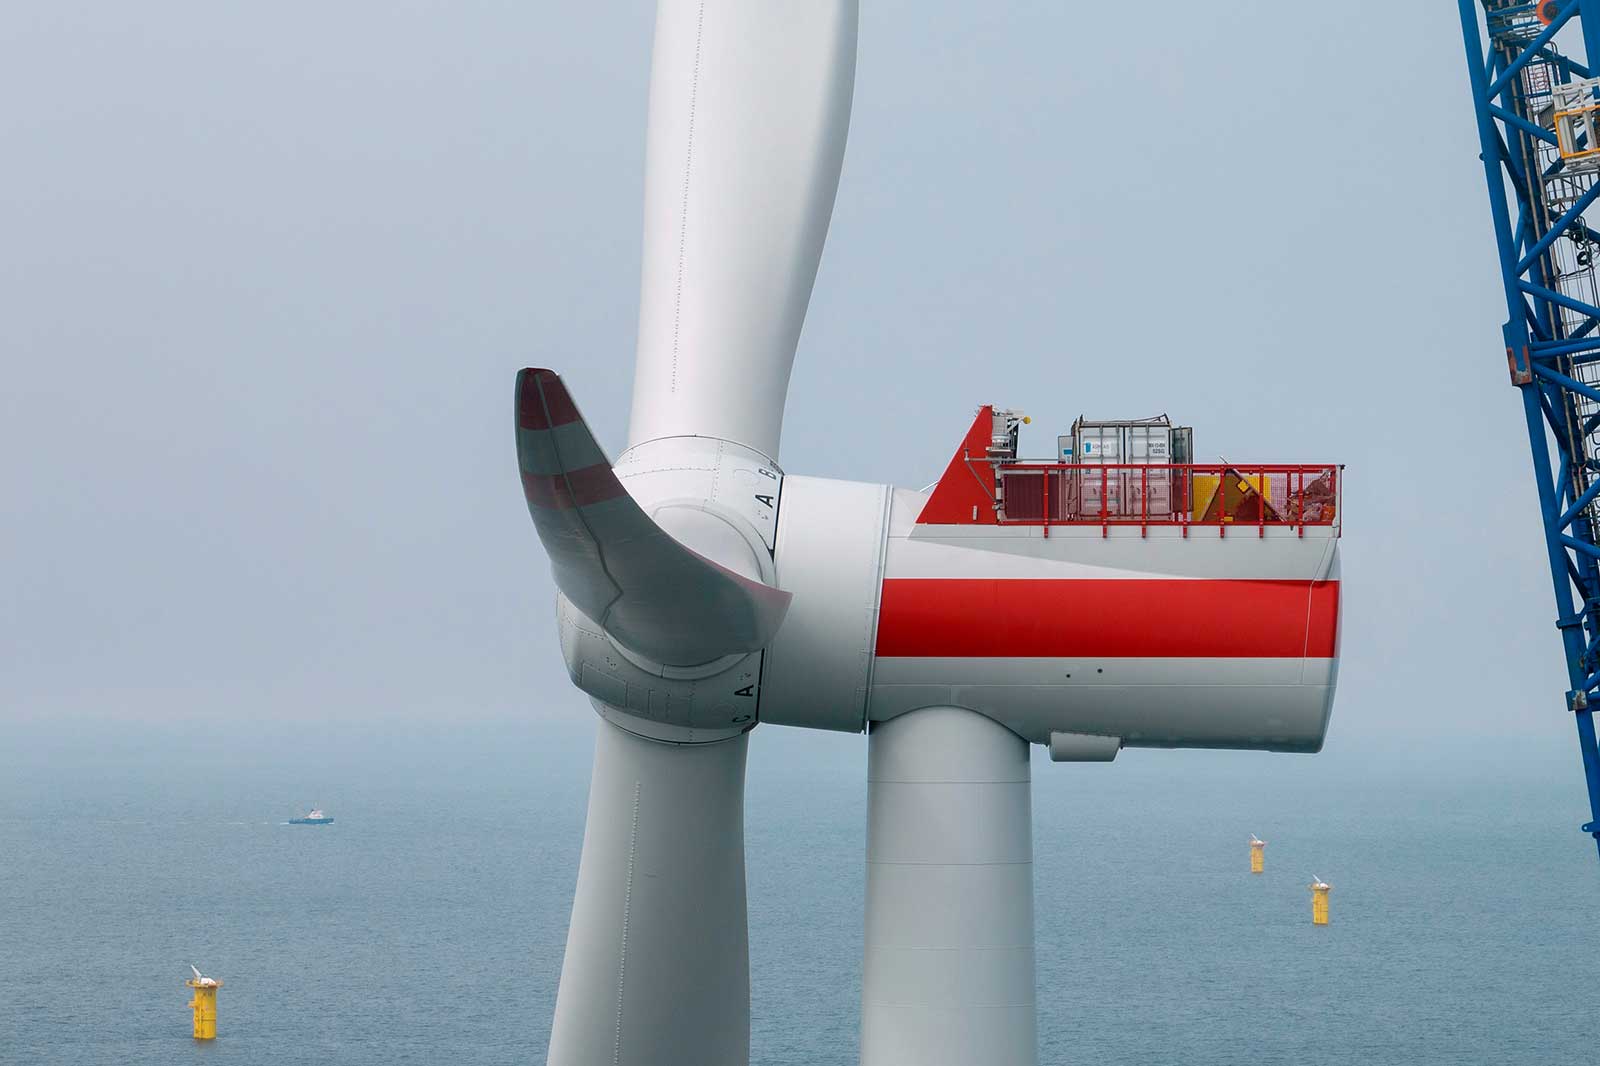 Power on: First turbine commissioned at RWE’s Kaskasi wind farm in the German North Sea